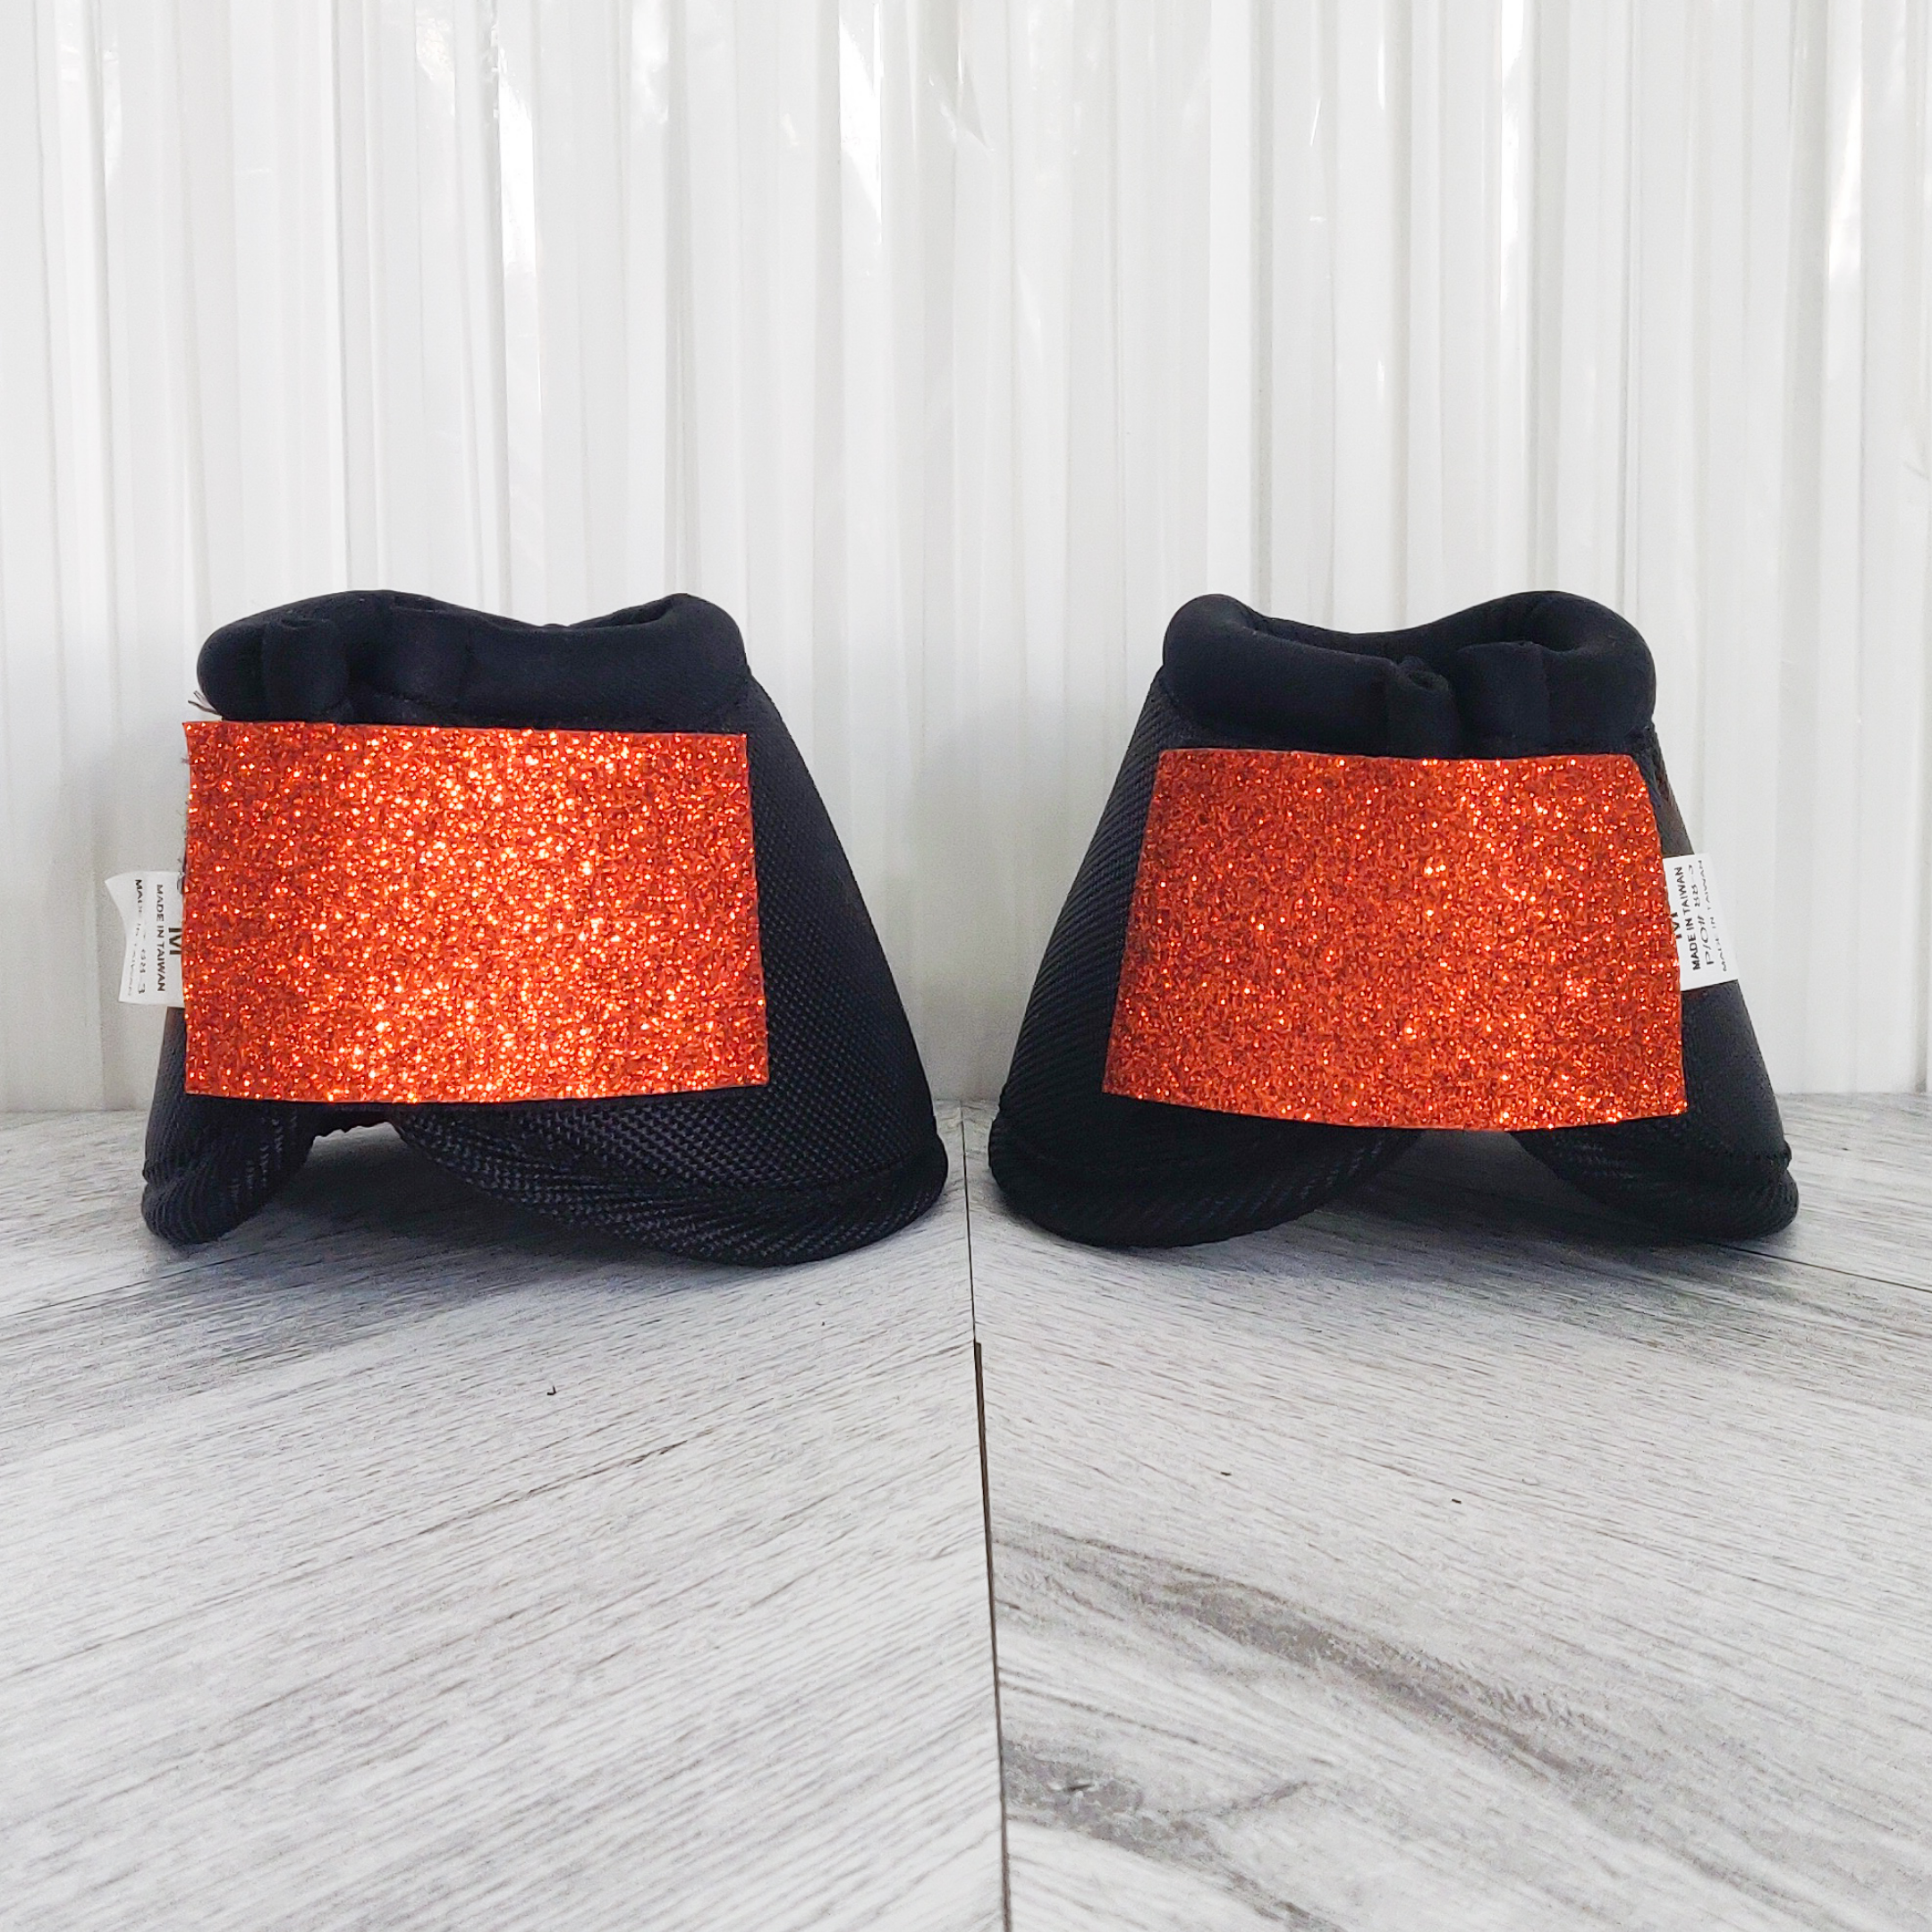 Custom Glitter Iconoclast Bell Boots - The Glamorous Cowgirl